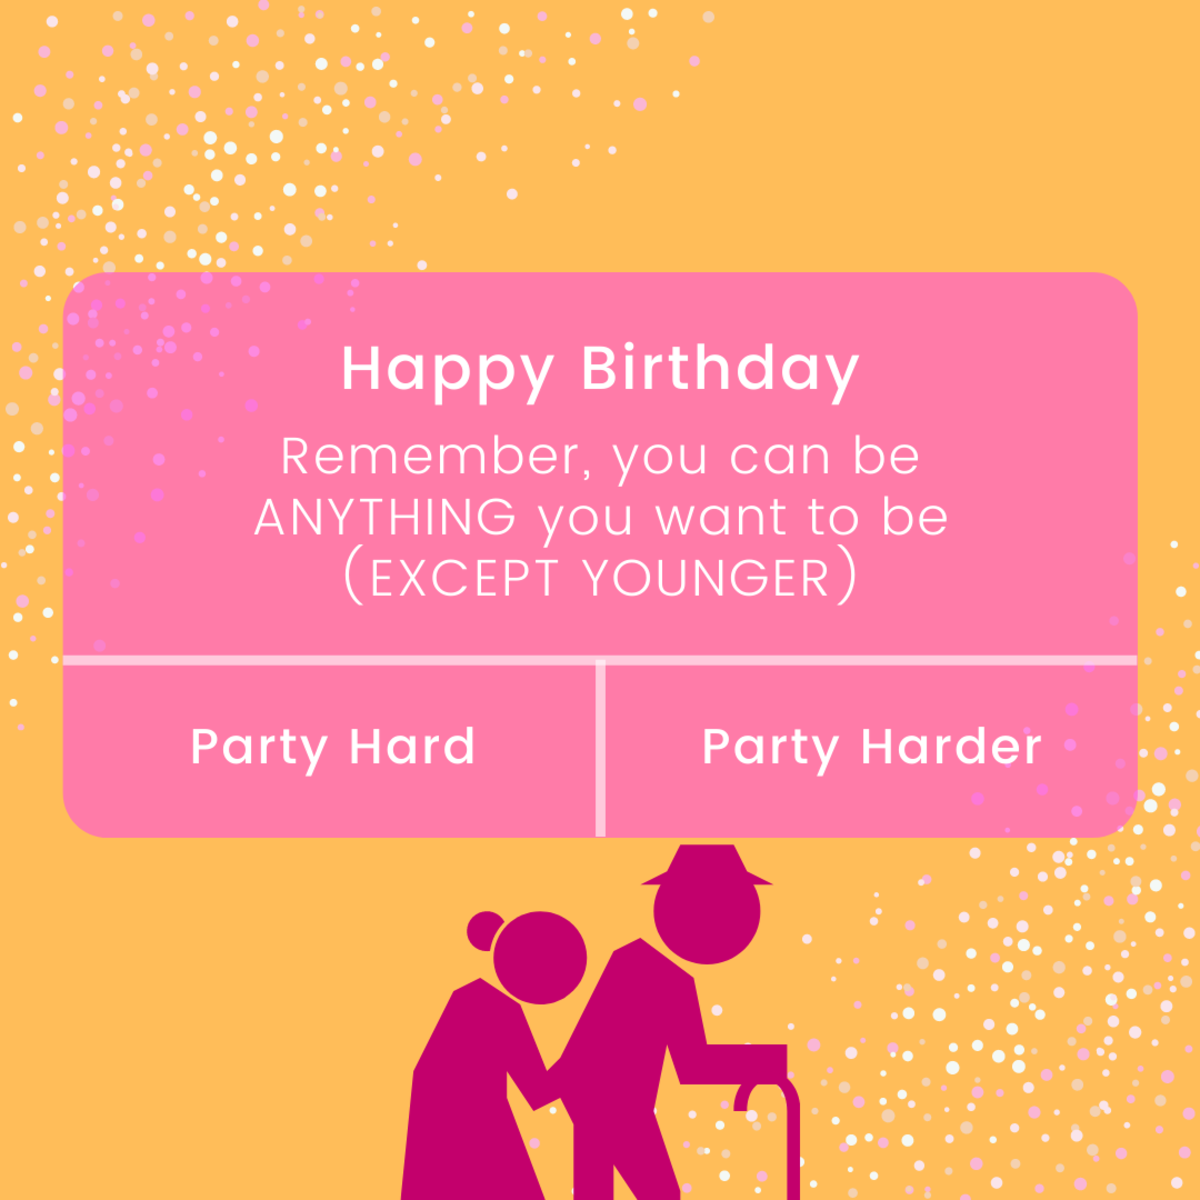 50+ Funny Birthday Greetings for Your Friends - Holidappy